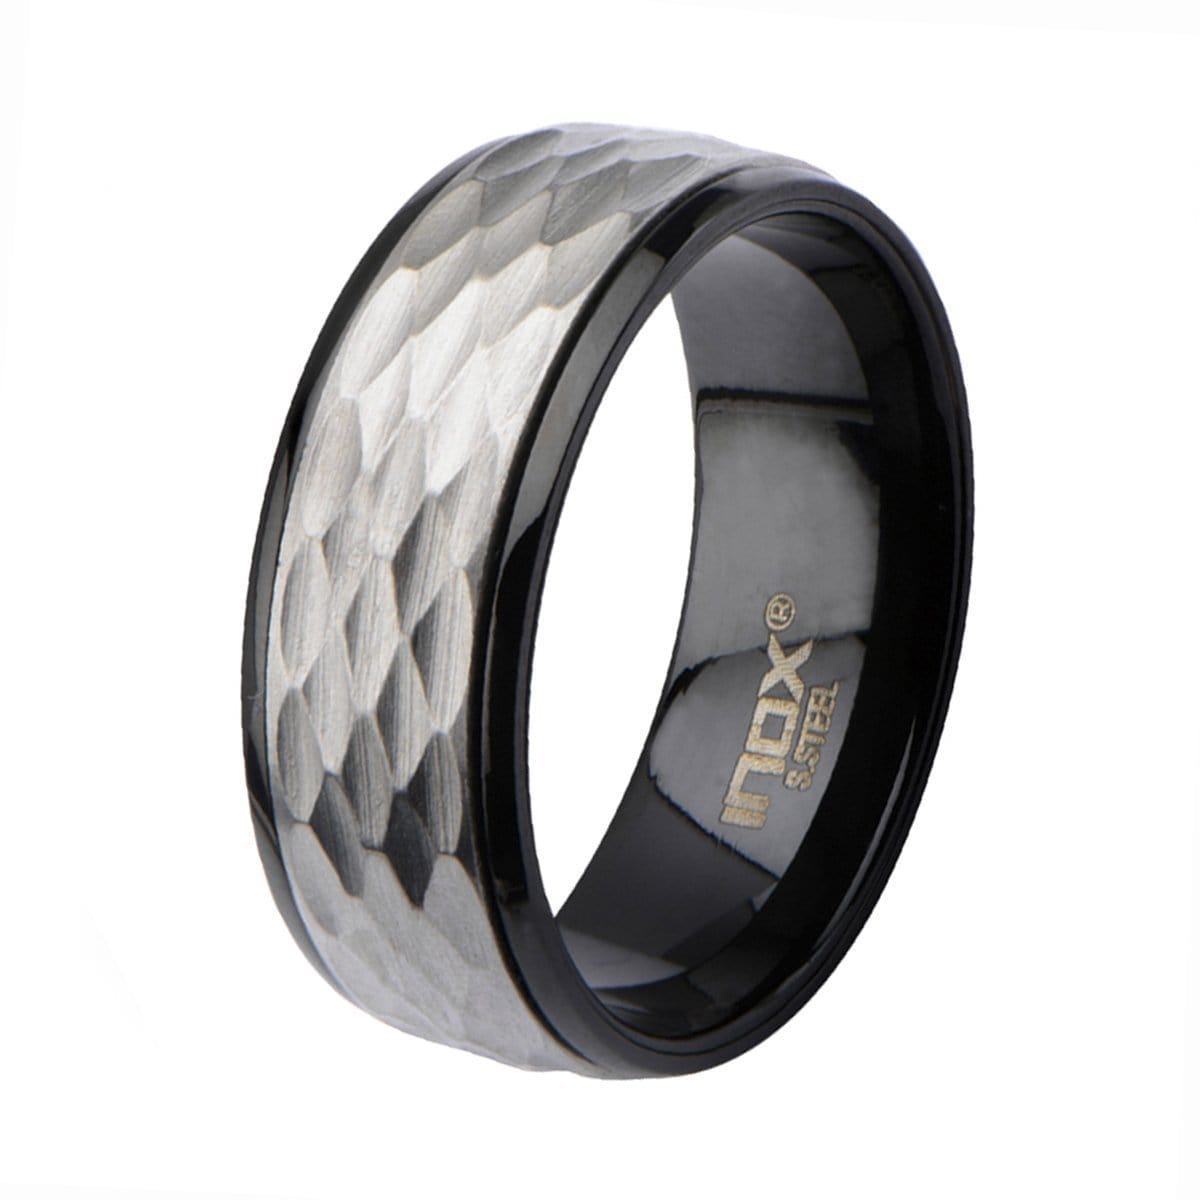 INOX JEWELRY Rings Black and Silver Tone Stainless Steel Dented Easy-Grip Spinner Ring